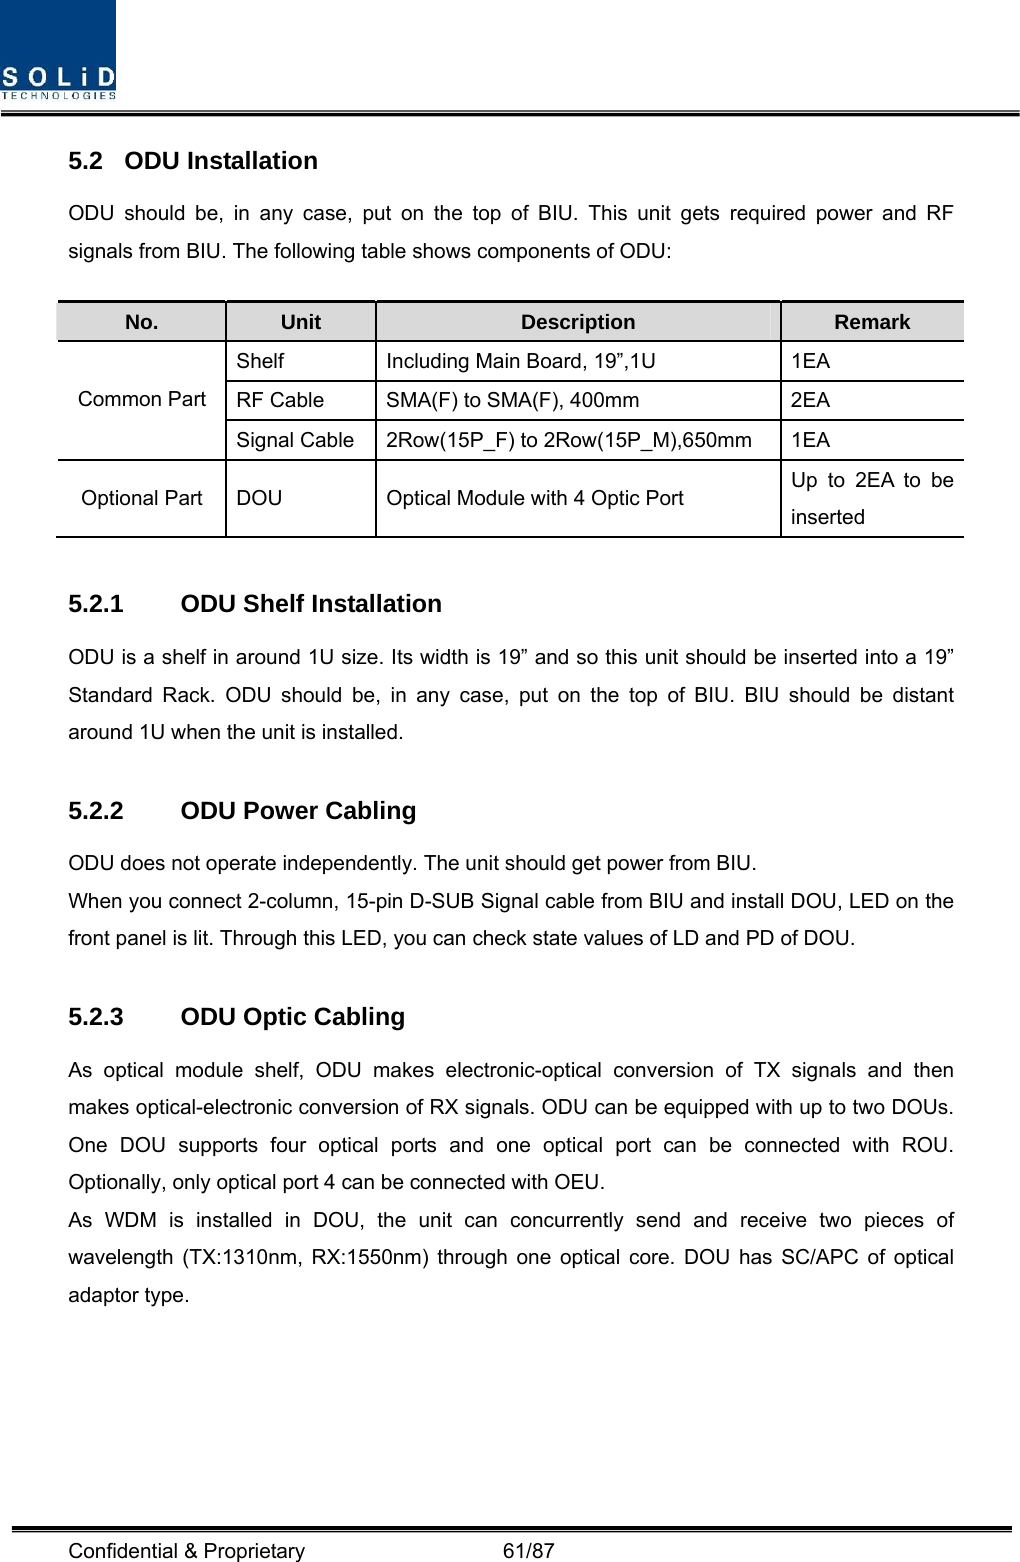  Confidential &amp; Proprietary                   61/87 5.2 ODU Installation ODU should be, in any case, put on the top of BIU. This unit gets required power and RF signals from BIU. The following table shows components of ODU:  No.  Unit  Description  Remark Shelf  Including Main Board, 19”,1U  1EA RF Cable  SMA(F) to SMA(F), 400mm  2EA Common Part Signal Cable  2Row(15P_F) to 2Row(15P_M),650mm  1EA Optional Part  DOU  Optical Module with 4 Optic Port  Up to 2EA to be inserted  5.2.1  ODU Shelf Installation ODU is a shelf in around 1U size. Its width is 19” and so this unit should be inserted into a 19” Standard Rack. ODU should be, in any case, put on the top of BIU. BIU should be distant around 1U when the unit is installed.  5.2.2  ODU Power Cabling ODU does not operate independently. The unit should get power from BIU. When you connect 2-column, 15-pin D-SUB Signal cable from BIU and install DOU, LED on the front panel is lit. Through this LED, you can check state values of LD and PD of DOU.  5.2.3  ODU Optic Cabling As optical module shelf, ODU makes electronic-optical conversion of TX signals and then makes optical-electronic conversion of RX signals. ODU can be equipped with up to two DOUs. One DOU supports four optical ports and one optical port can be connected with ROU. Optionally, only optical port 4 can be connected with OEU. As WDM is installed in DOU, the unit can concurrently send and receive two pieces of wavelength (TX:1310nm, RX:1550nm) through one optical core. DOU has SC/APC of optical adaptor type. 